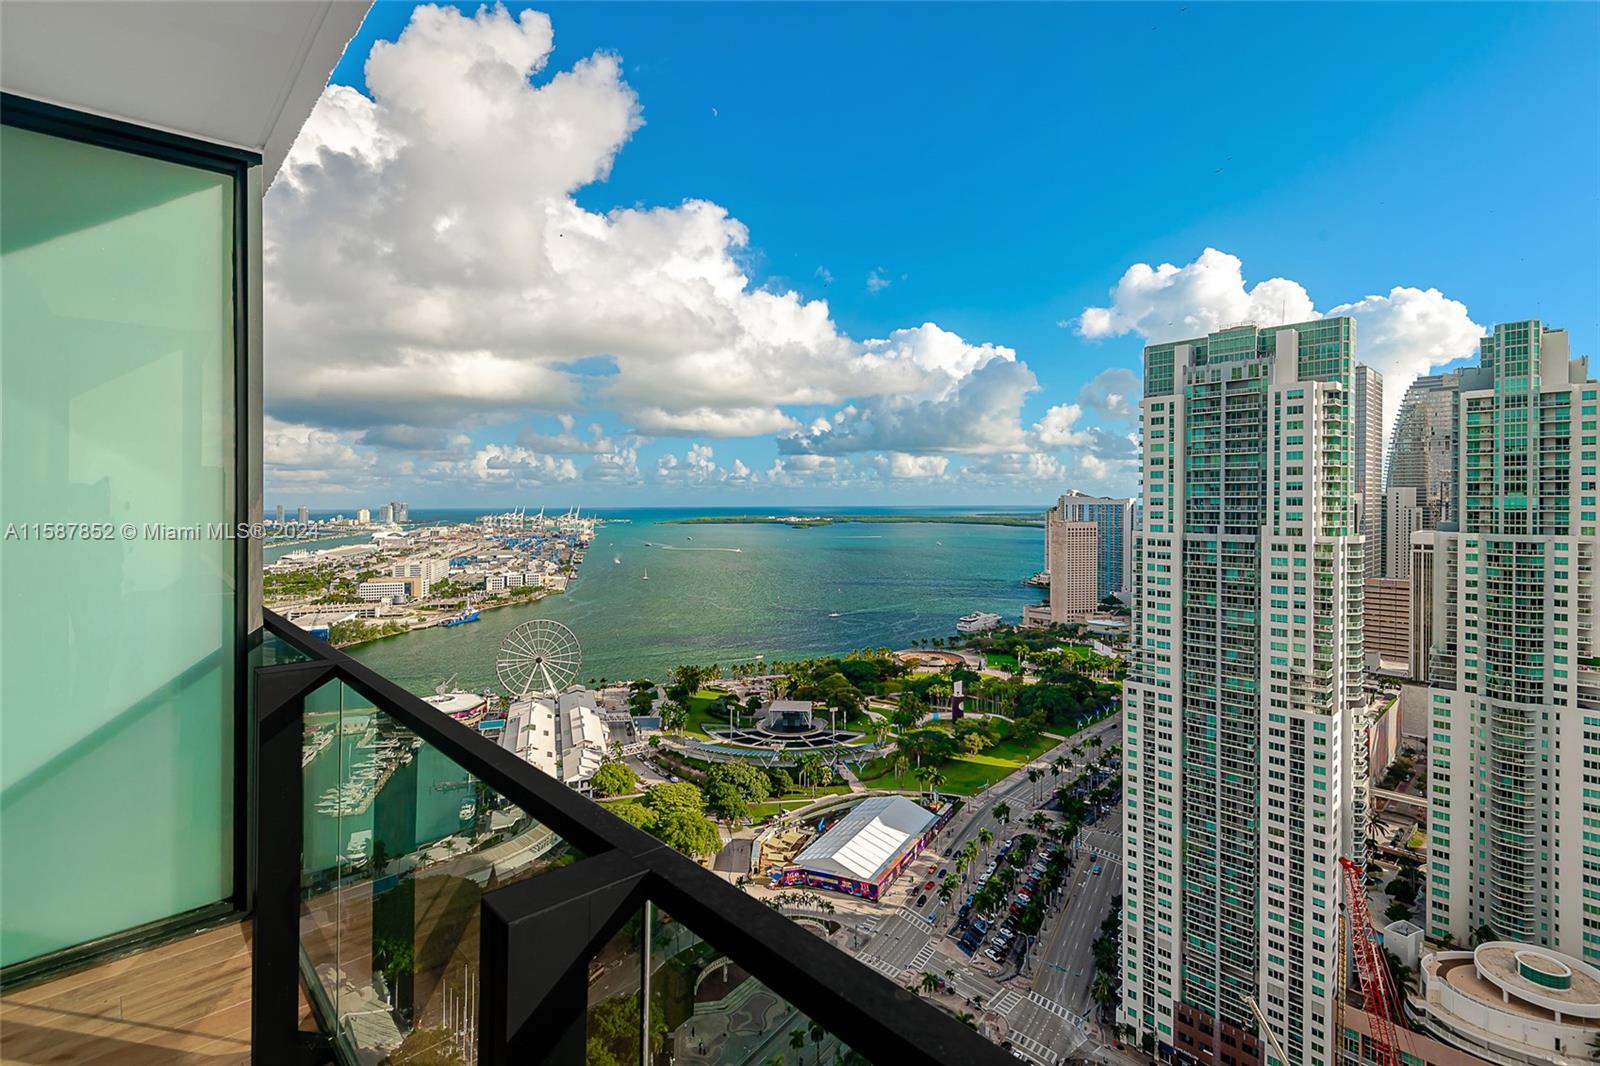 Discover vibrant living in beautifully designed furnished studios with stunning water views. Enjoy mindful and sophisticated interiors complemented by floor-to-ceiling windows showcasing Biscayne Bay and Downtown Miami. Fully furnished units with Ecobee smart thermostats and keyless entry offer modern convenience. With access to curated amenities and proximity to entertainment, arts, and dining, experience a dynamic lifestyle at The Elser Hotel Residences. Great investment property for short term rentals.